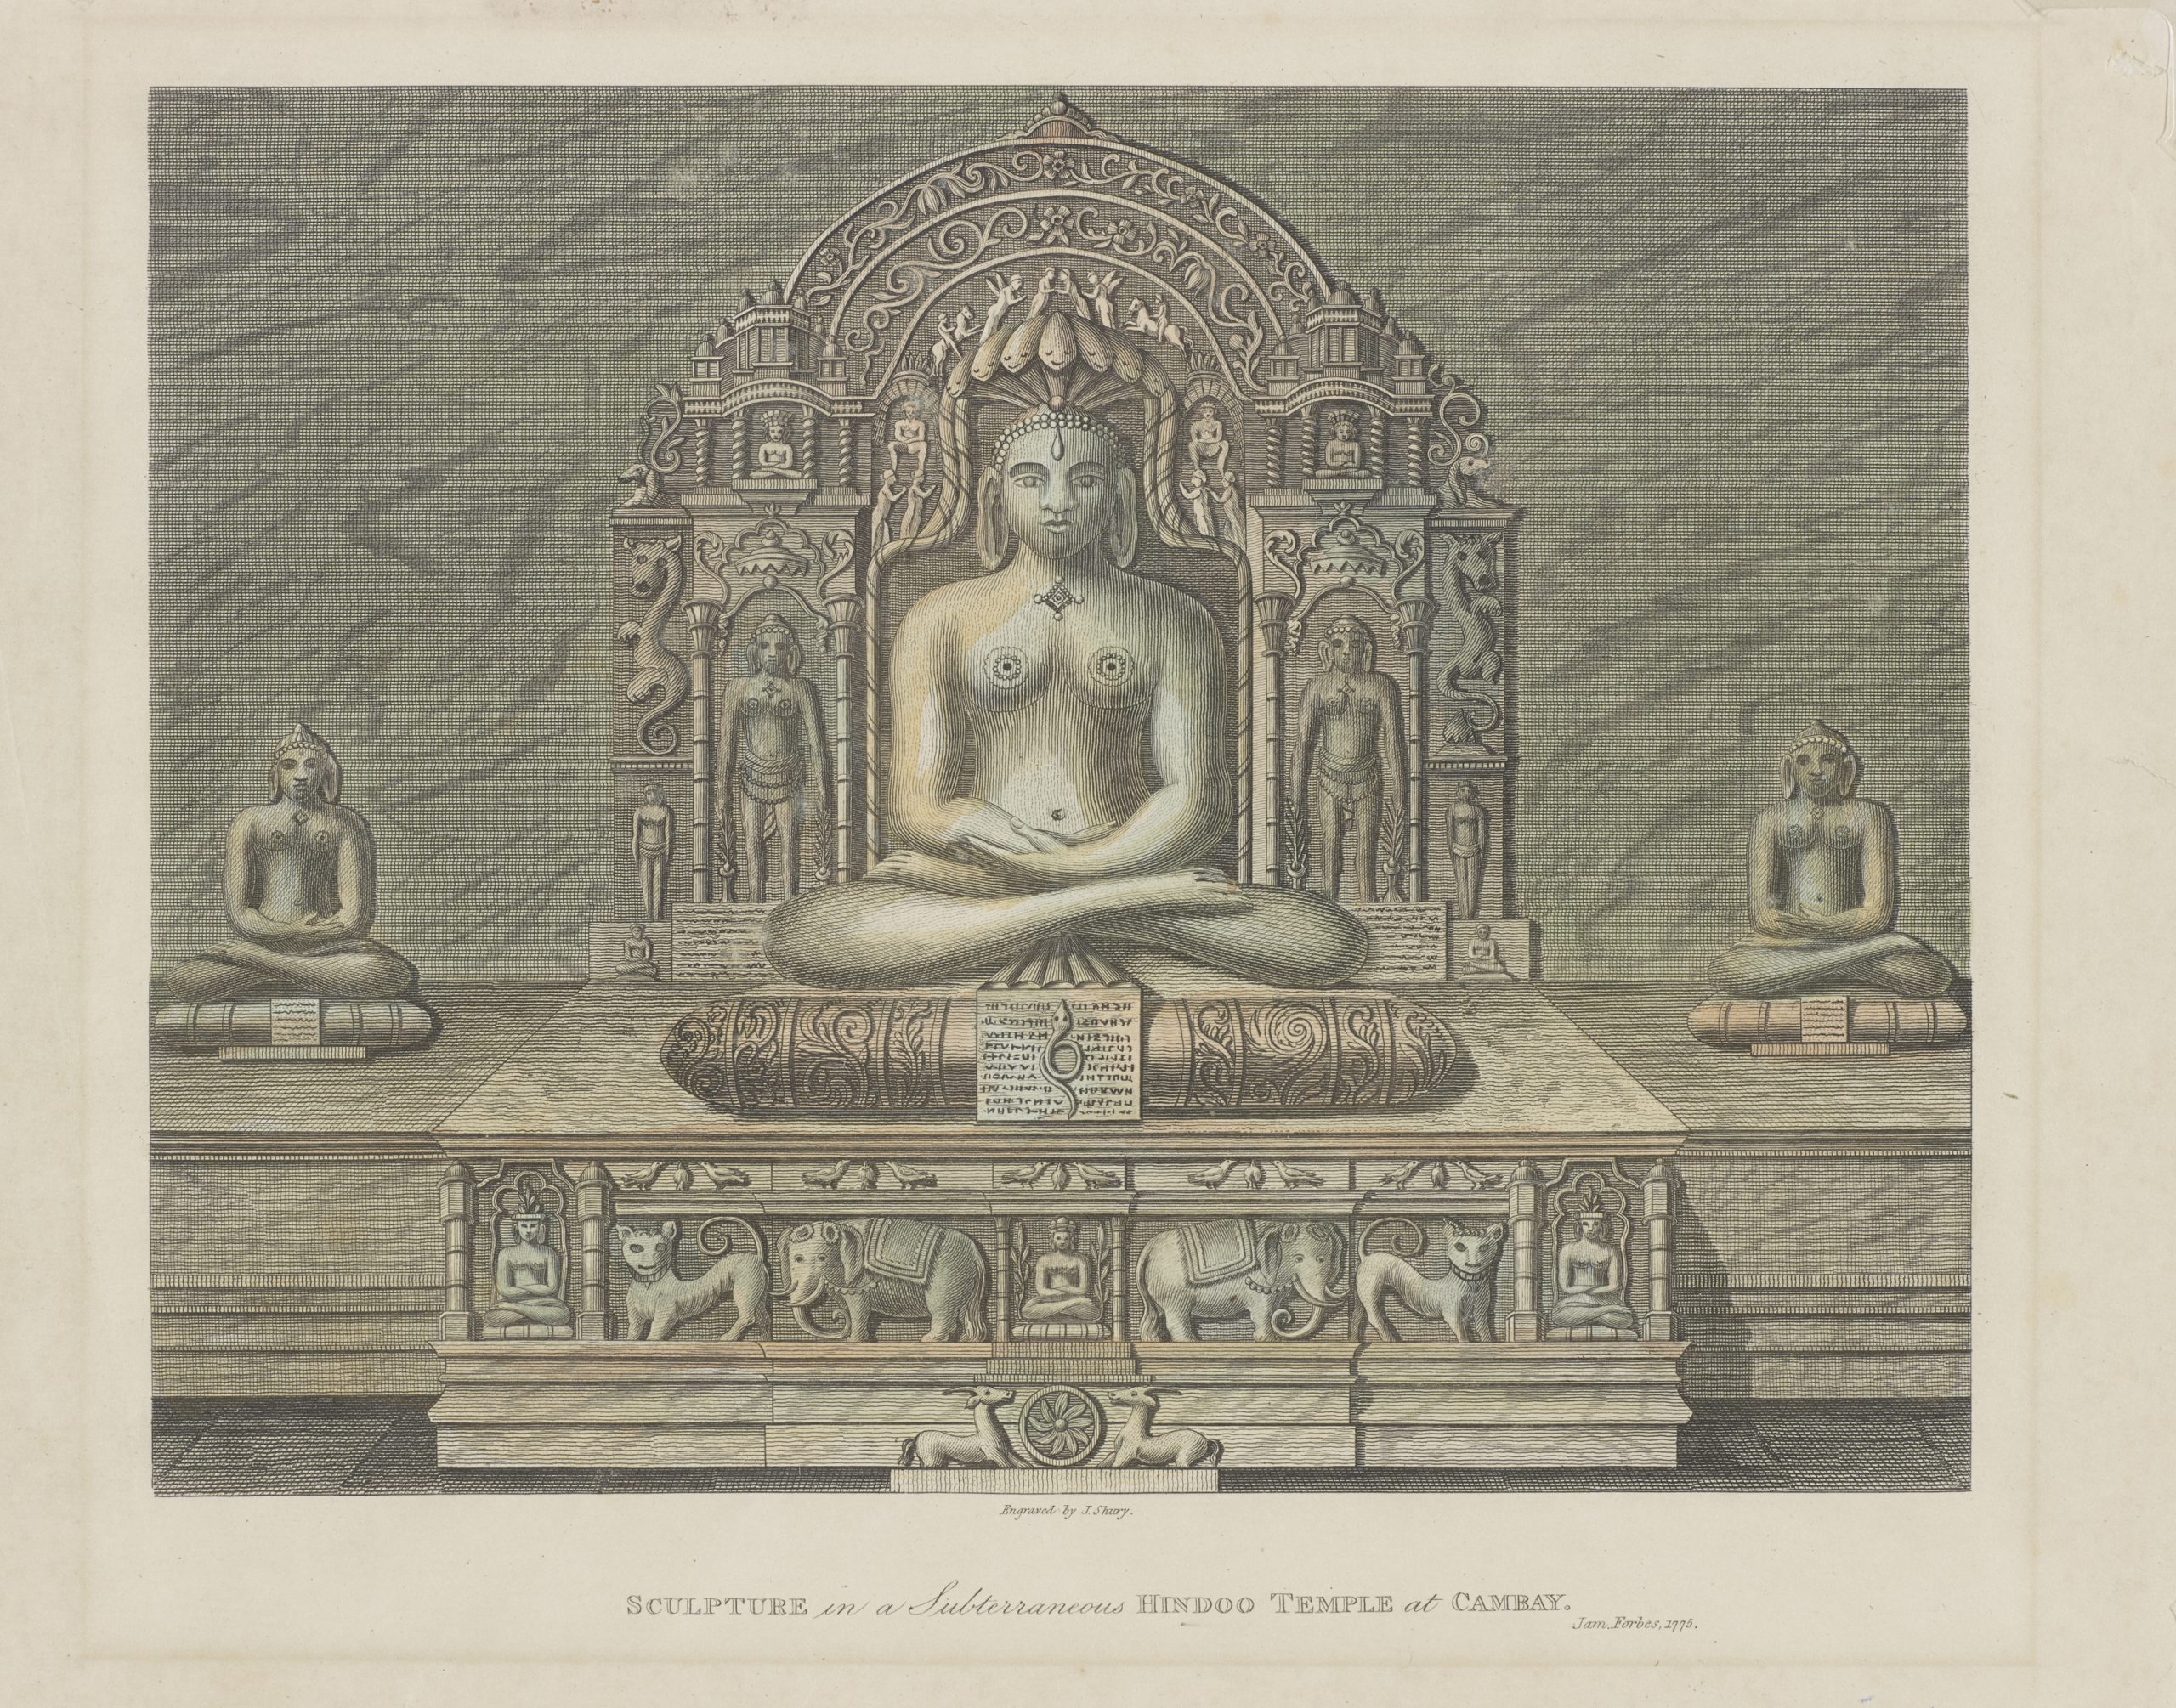 “Sculpture in a Subtaraneous Hindoo Temple at Cambay”